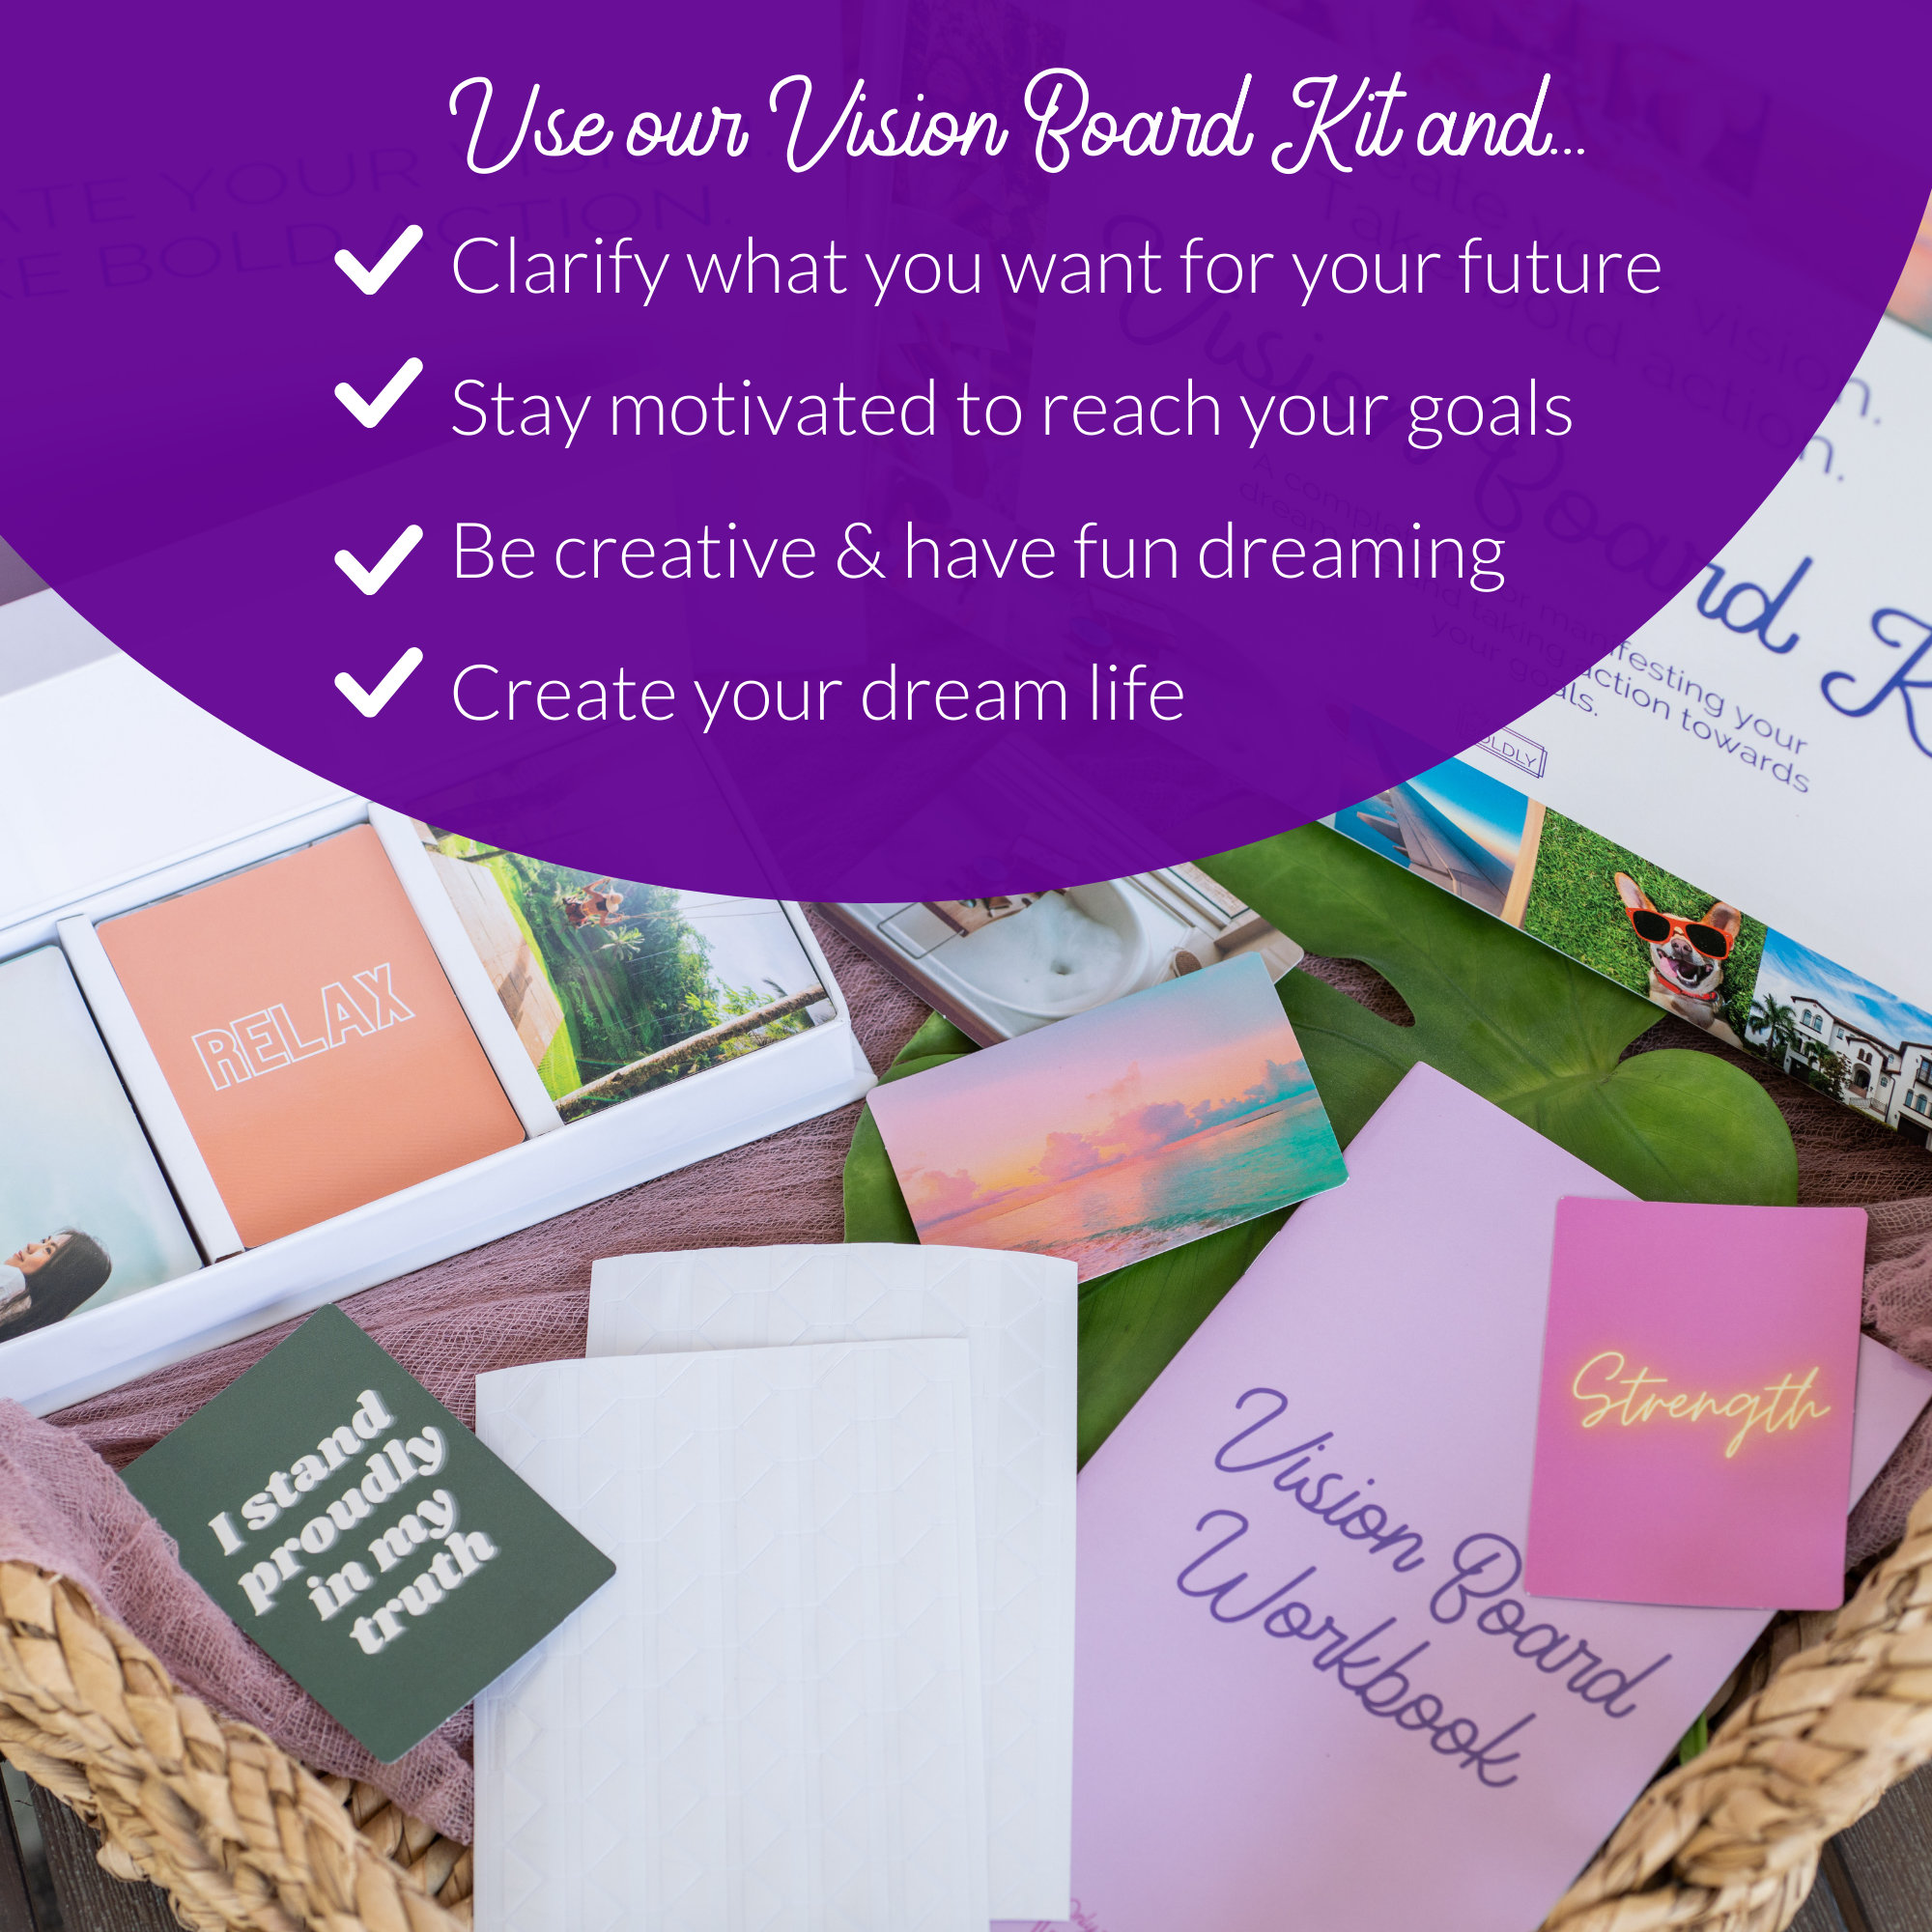 Vision Board Kit - Premade Dream Board with Manifestation Pictures  Supplies, Goal Collage Book for Wall, Complete Mood Boards Kits, Law of  Attraction